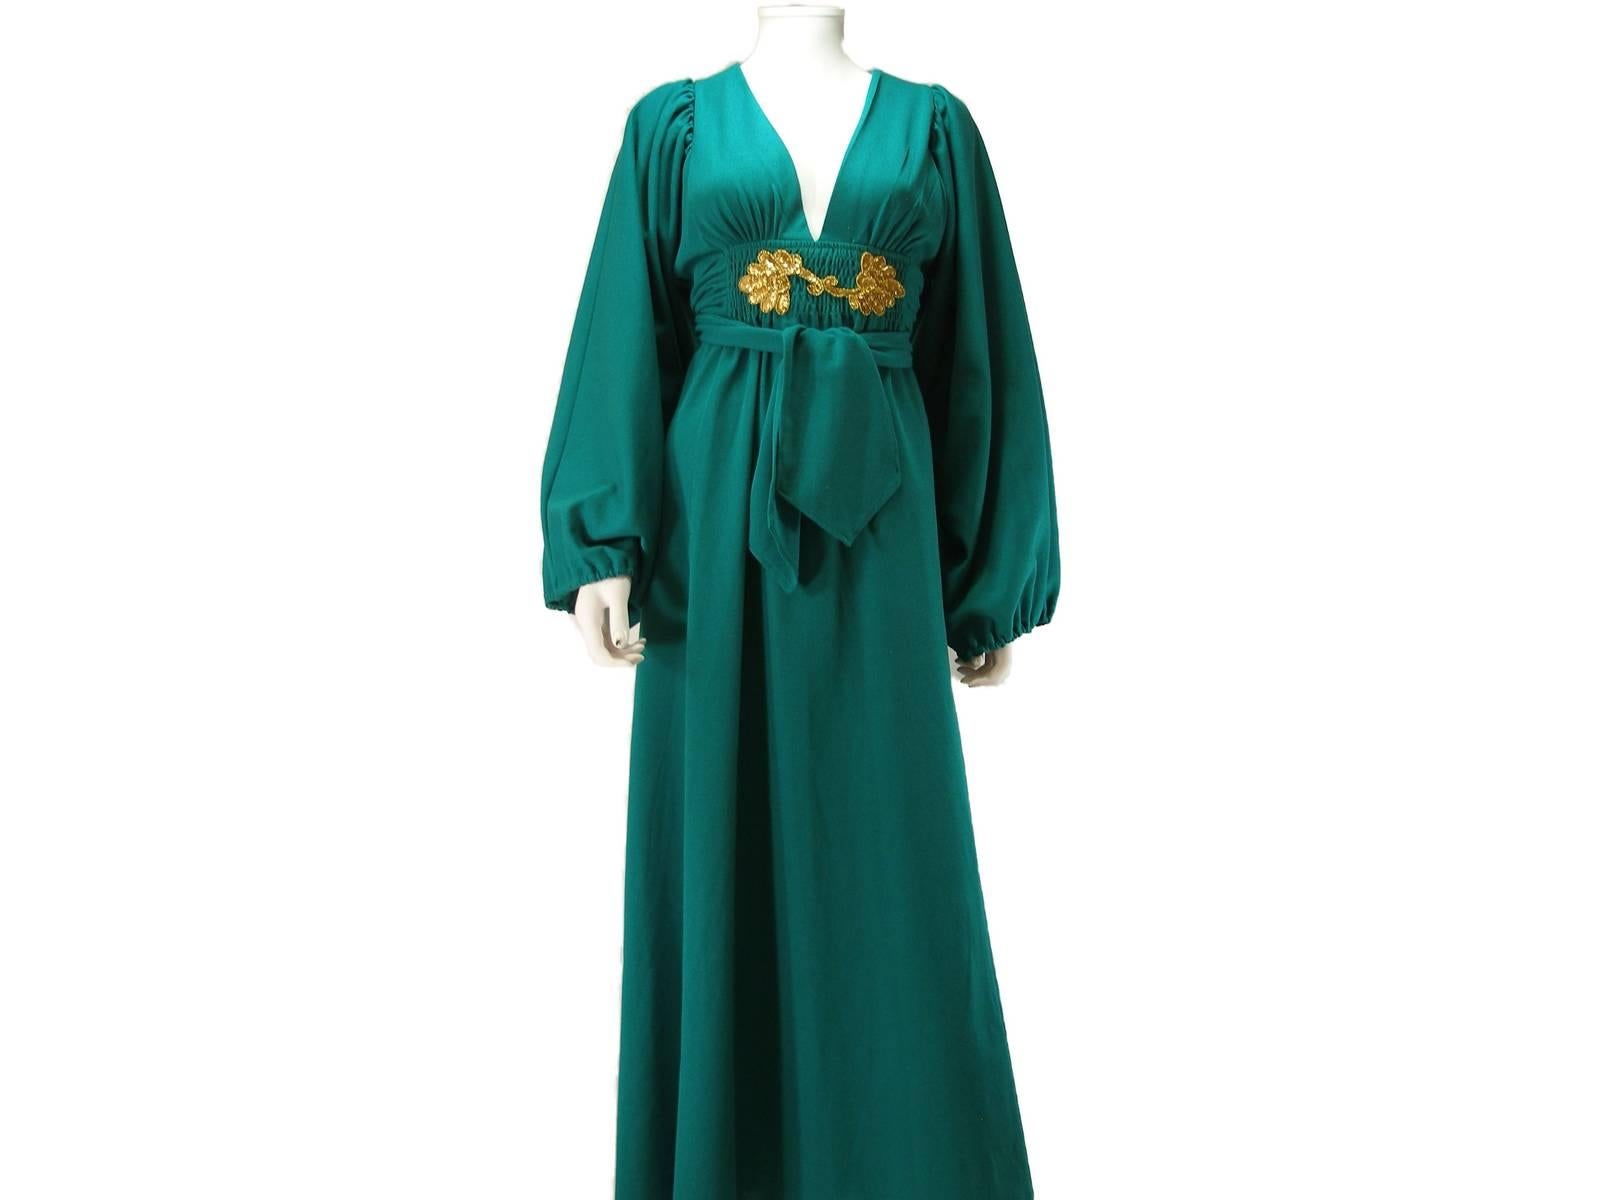 Rare  Style Caftans Maxi dress 1970's
Caftans Maxi Dress Ossie Clark for Radley 
Size : 4 US / 36 FR / Small Size 
Shoulder :  approx 35 / 36 cm
Chest (under armholes ) : approx 78 cm
Waist :  approx 75 cm 
Sleeves : 59 cm
Total lenght : 140